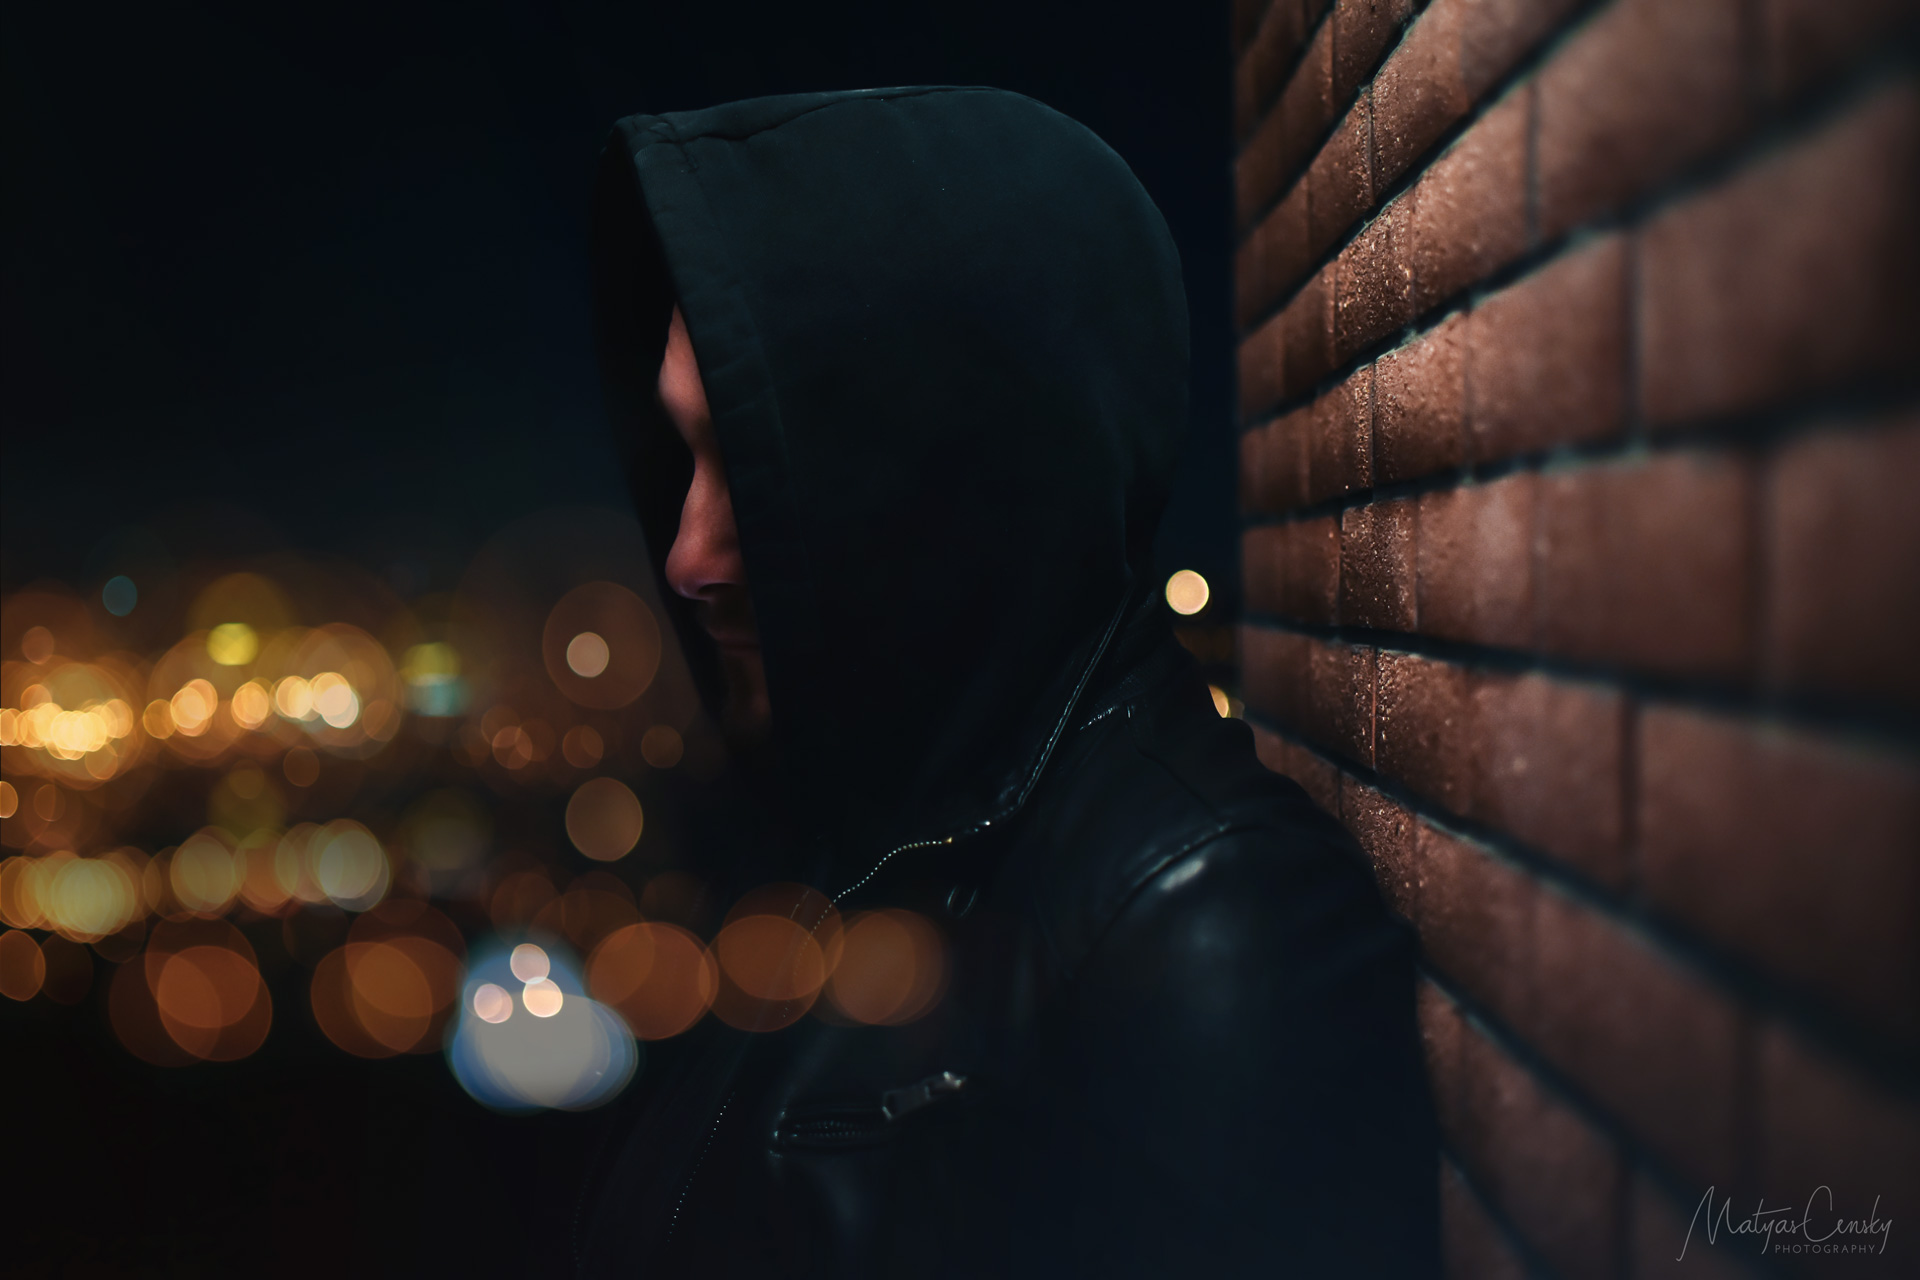 Portrait photo of Matyas Censky posing against a brick wall, in black leather jacket and hoody with night city lights blurred in back ground with bokeh effect.